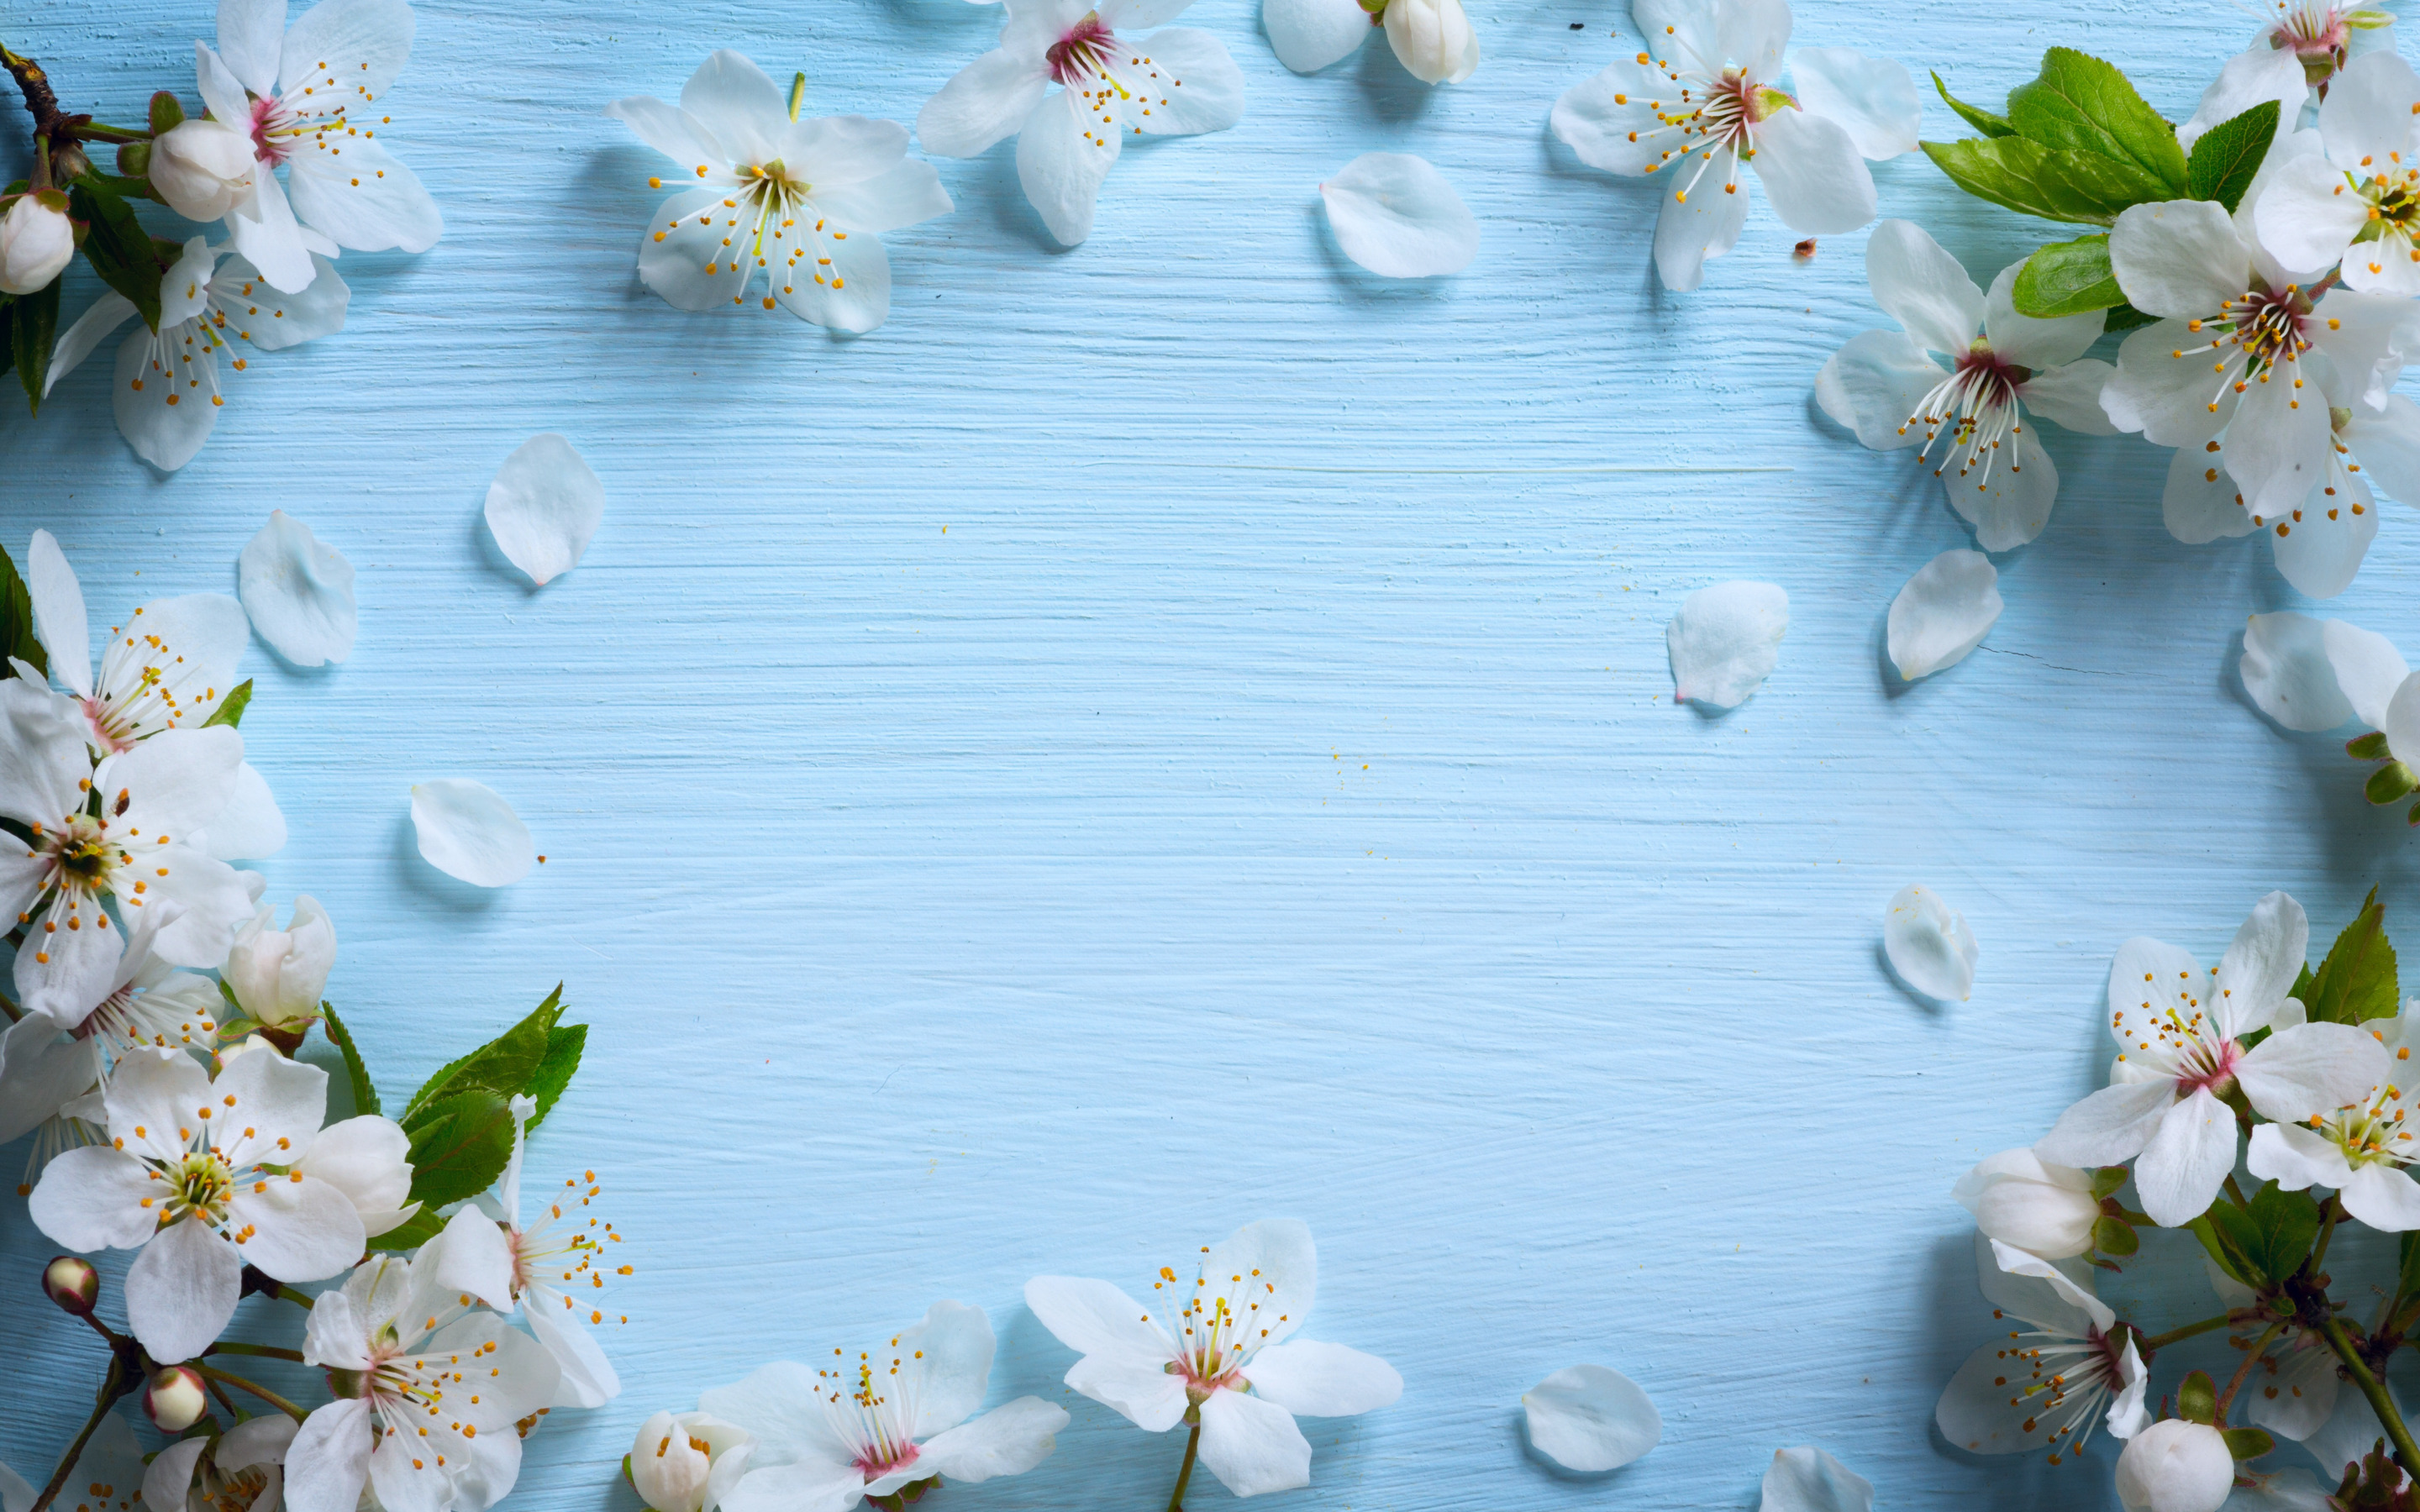 Download wallpaper spring flower frame, apple blossom, blue wooden background, white flowers, wooden texture, floral frame for desktop with resolution 2880x1800. High Quality HD picture wallpaper